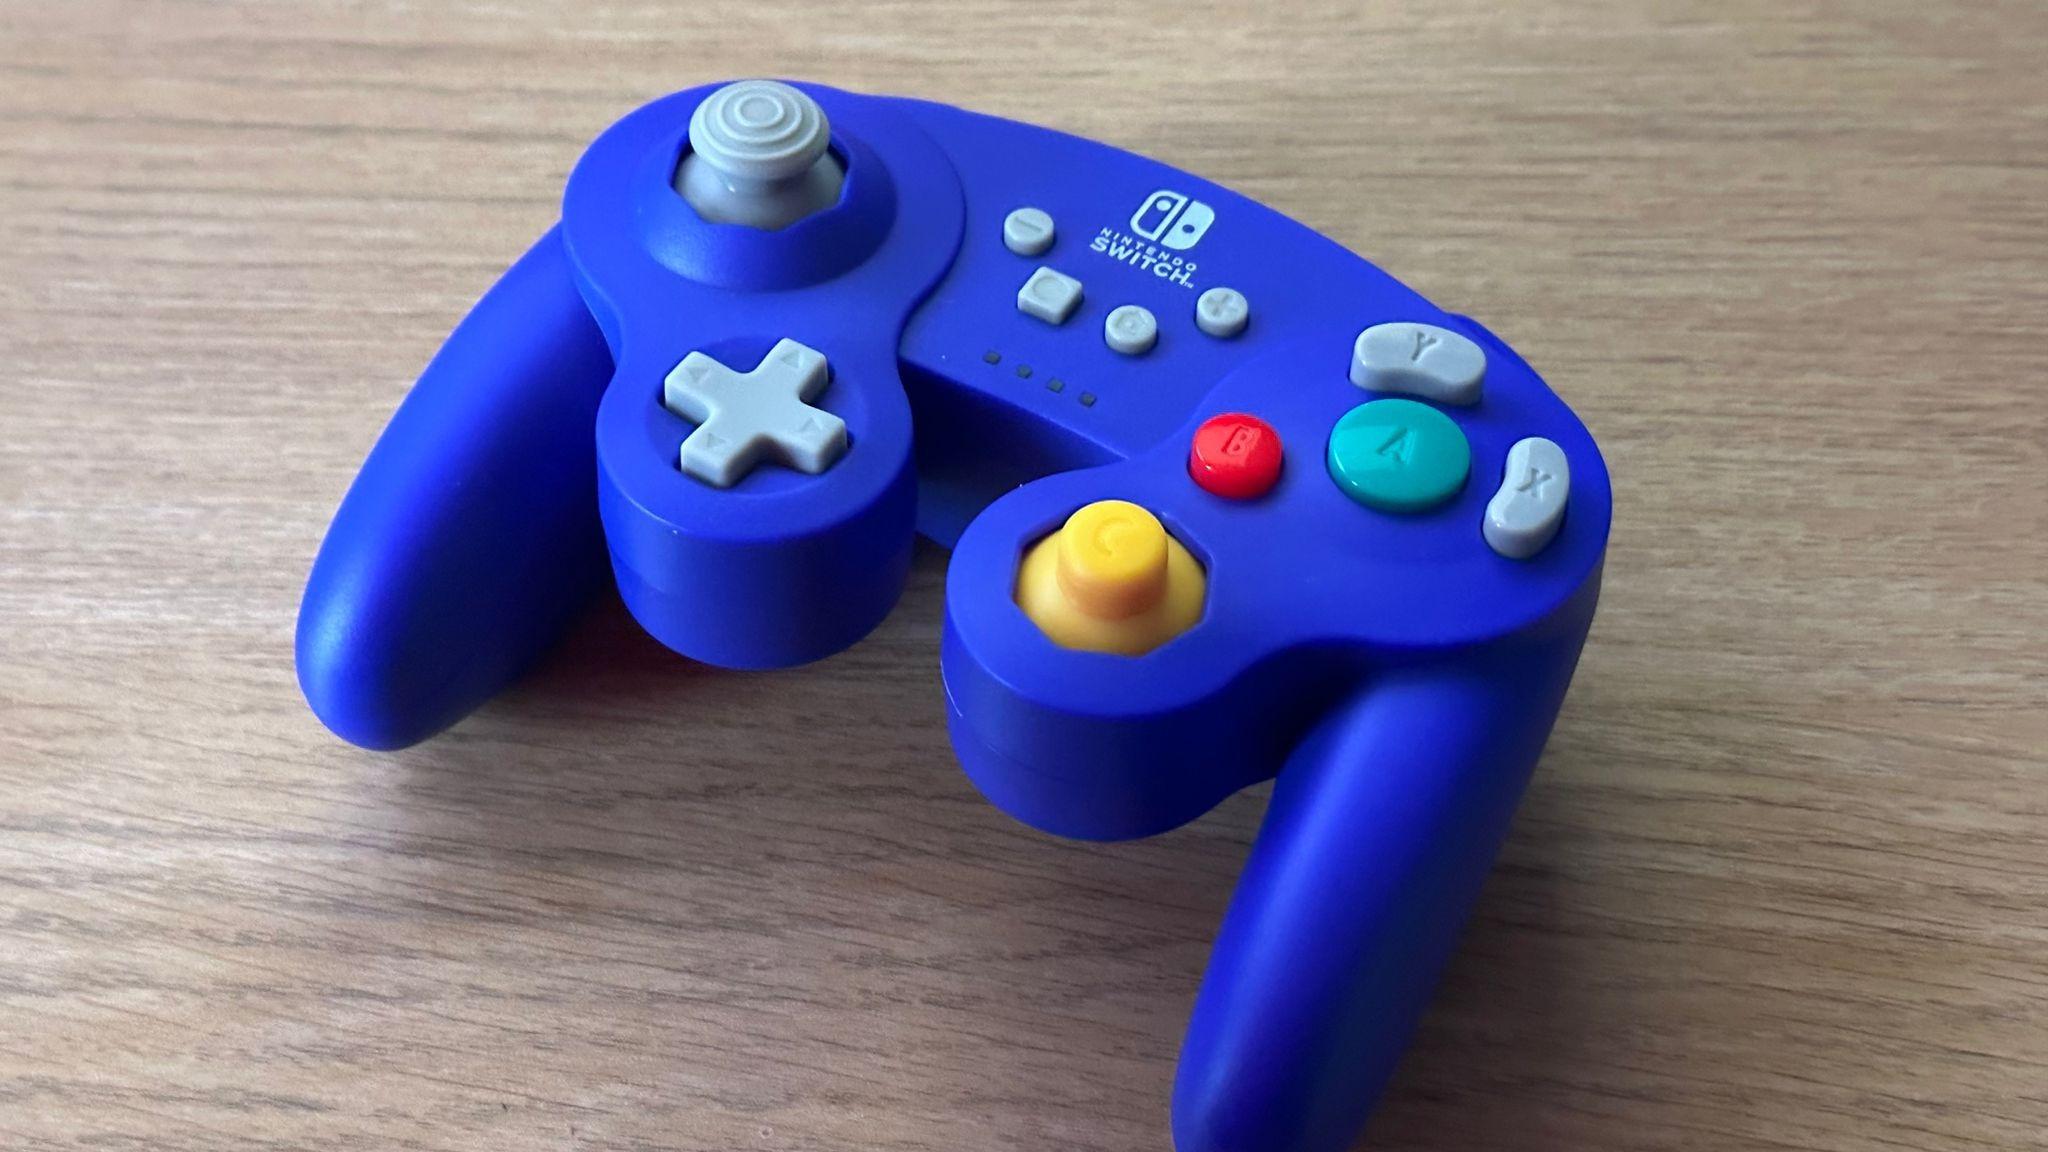 PowerA Gamecube Controller in purple on table